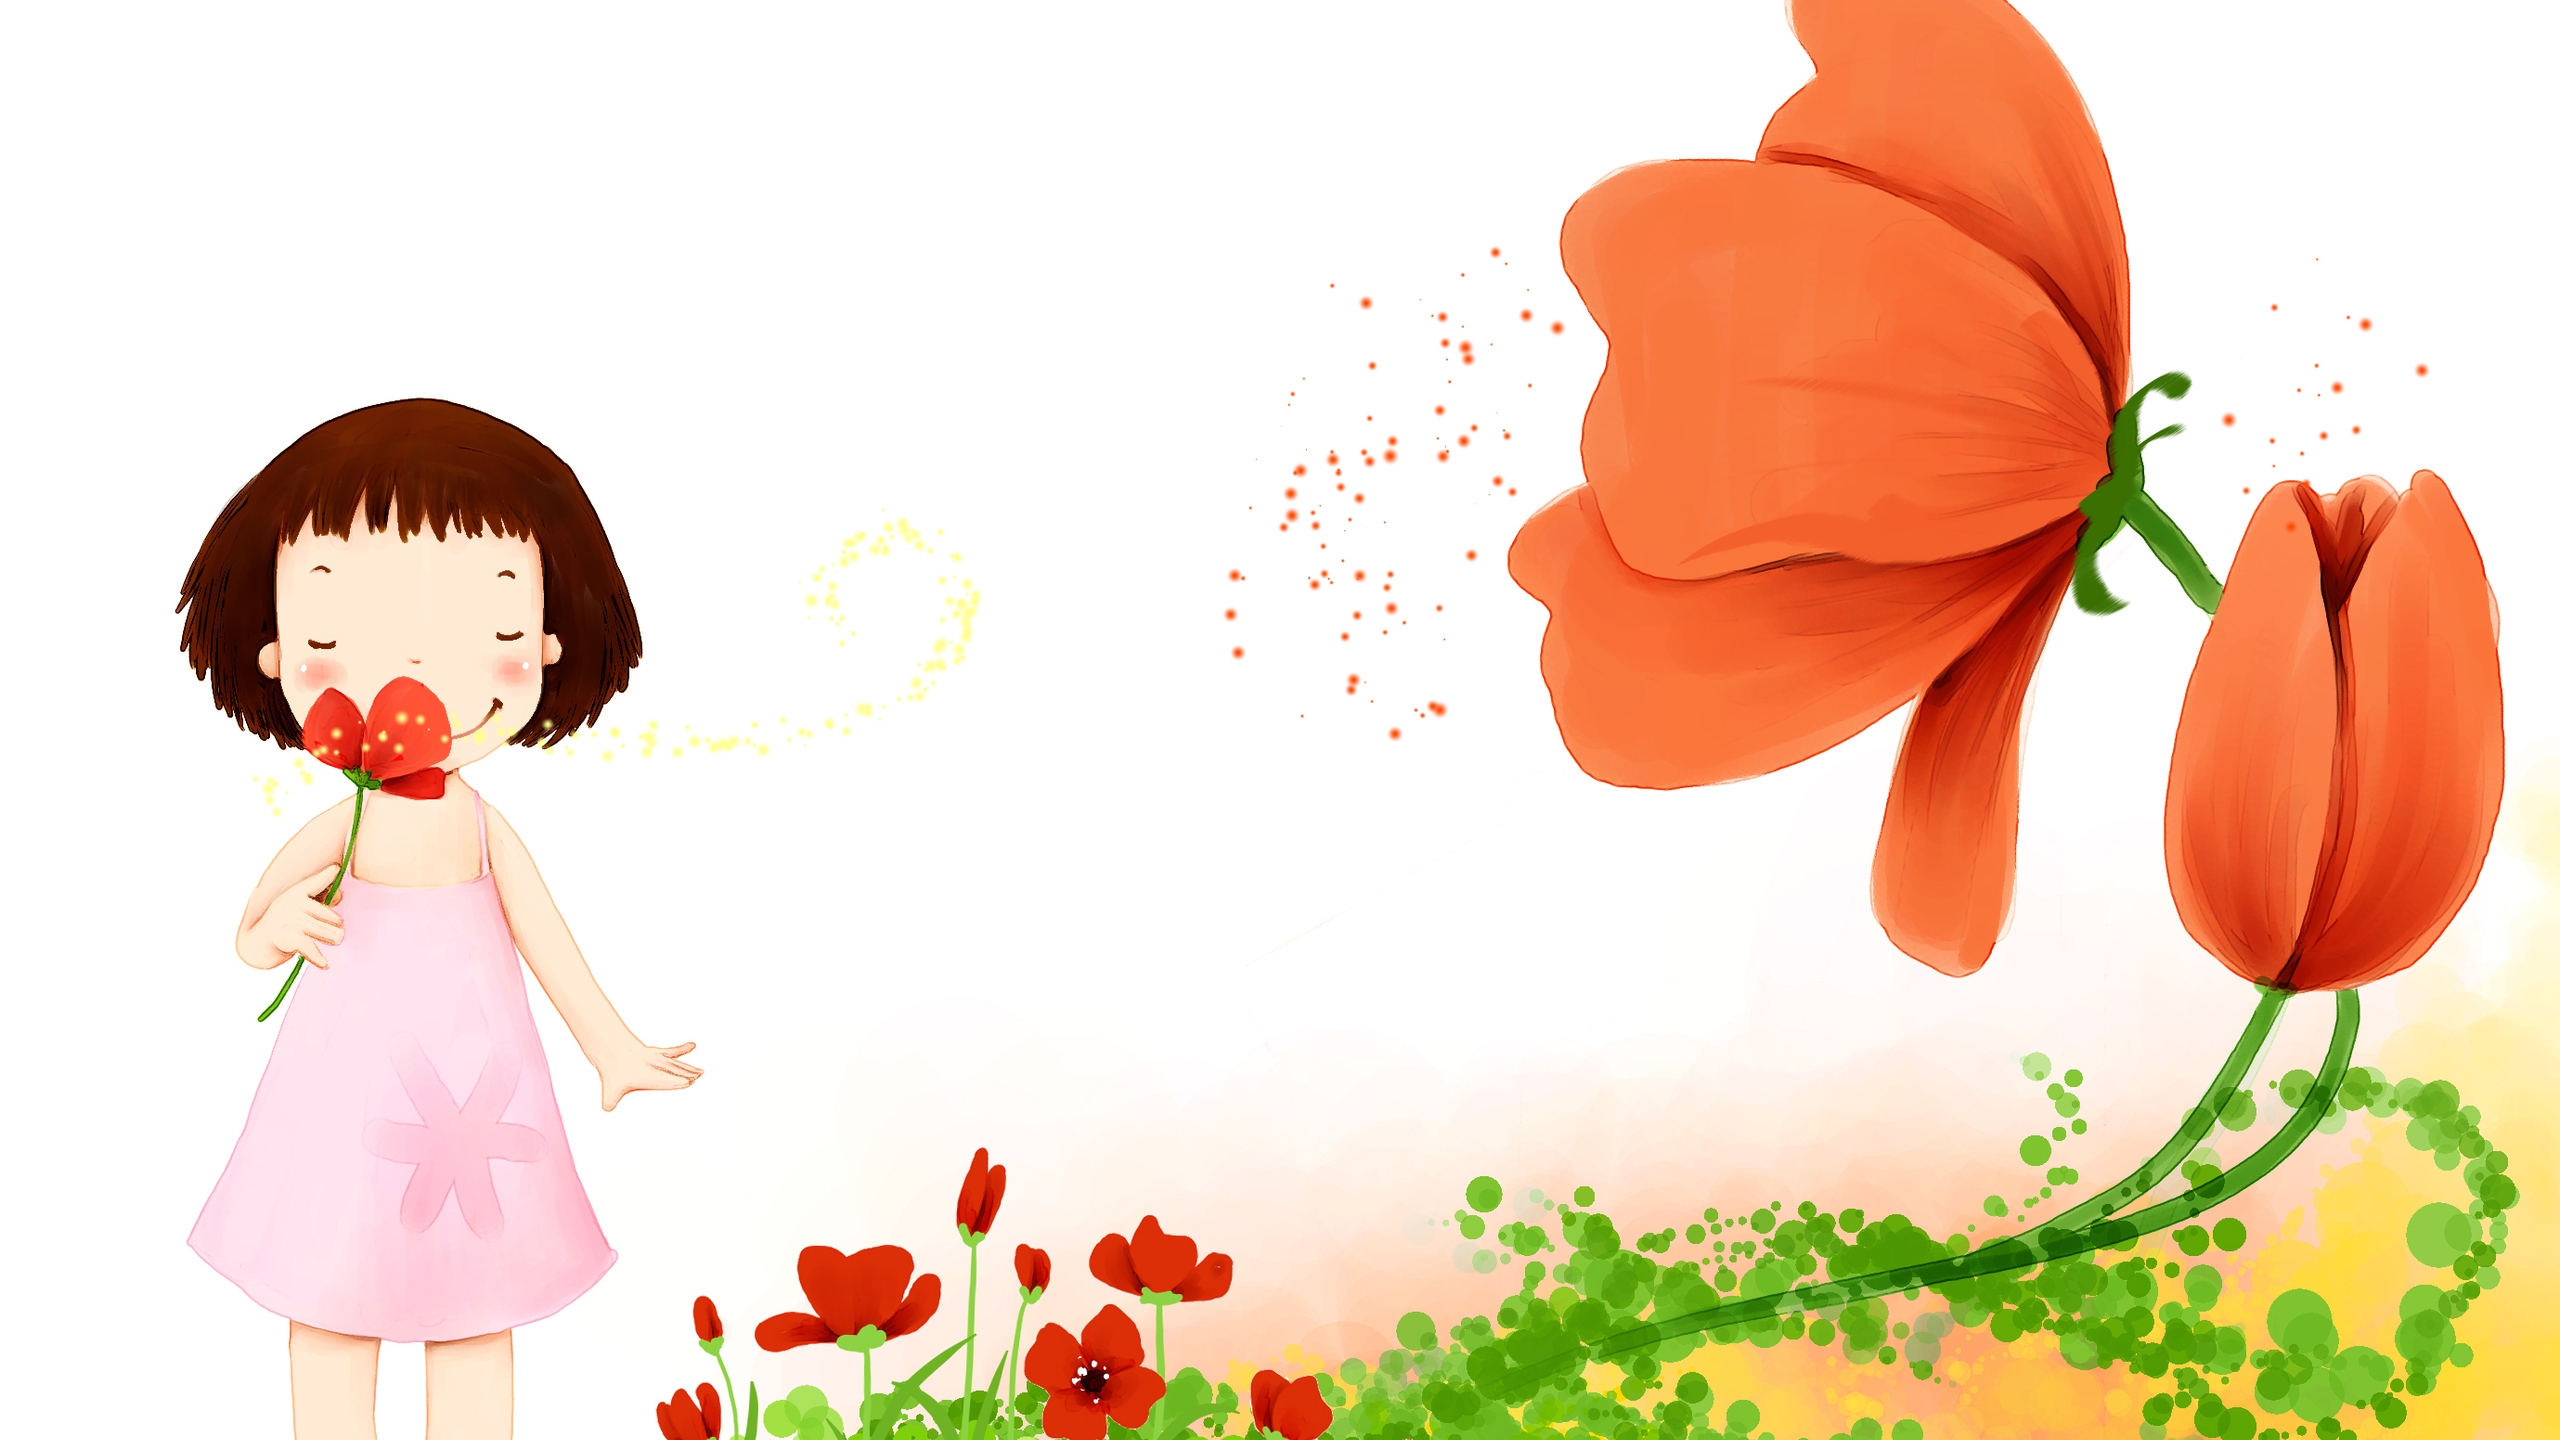 Little Girl with Flowers for 2560x1440 HDTV resolution